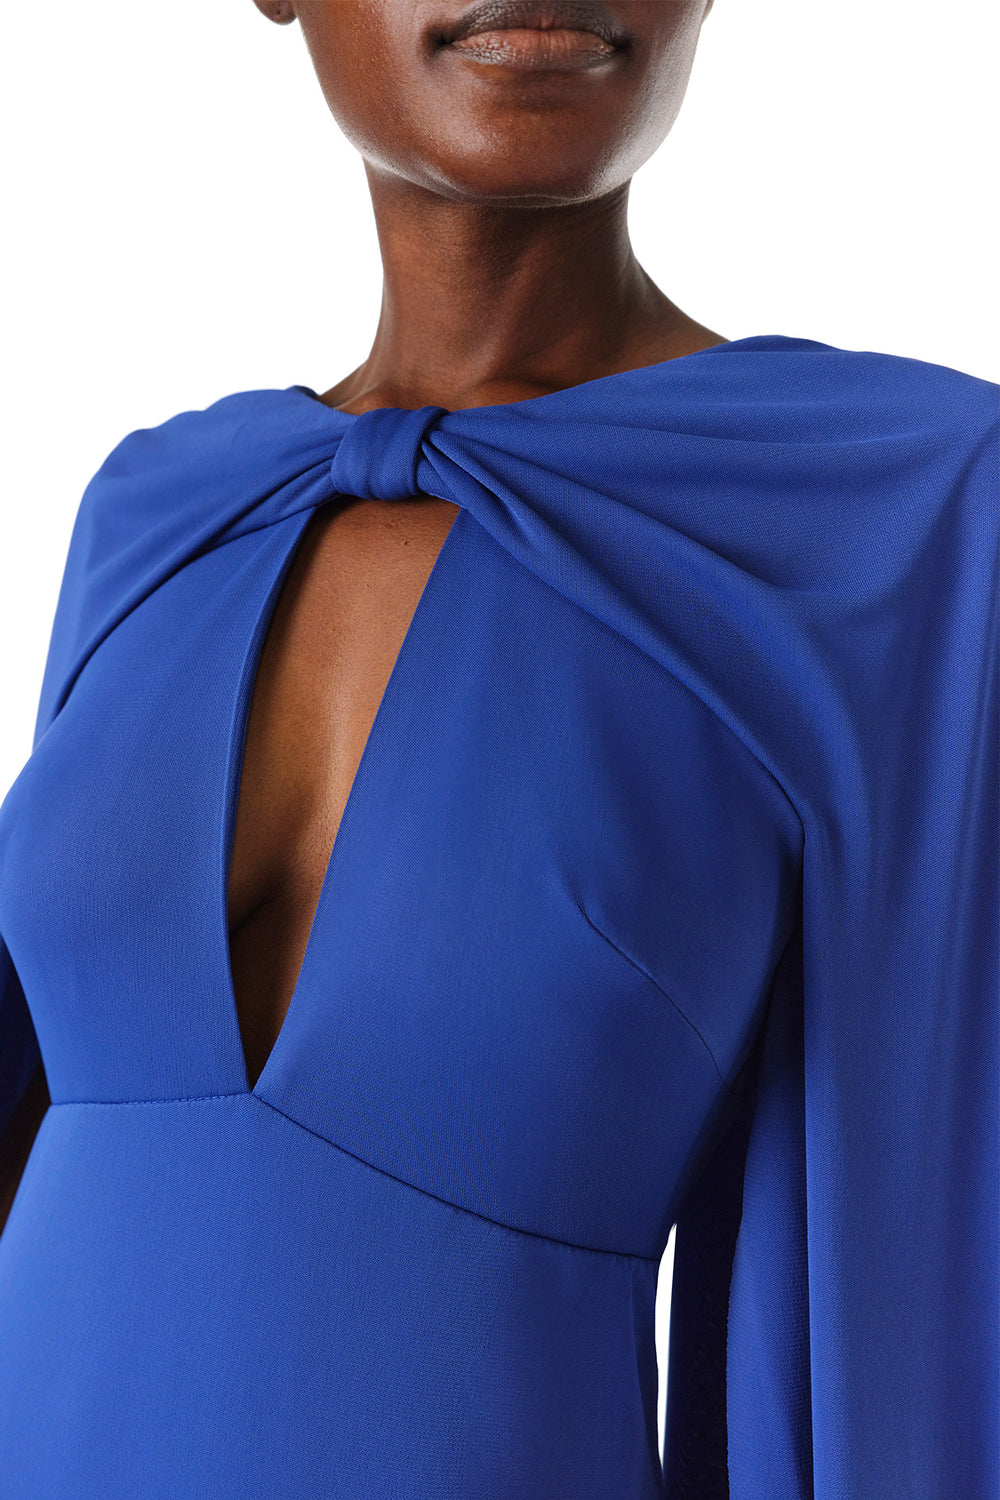 Monique Lhuillier Spring 2024 royal blue crepe-back satin gown with attached cape and keyhole bodice - keyhole detail.